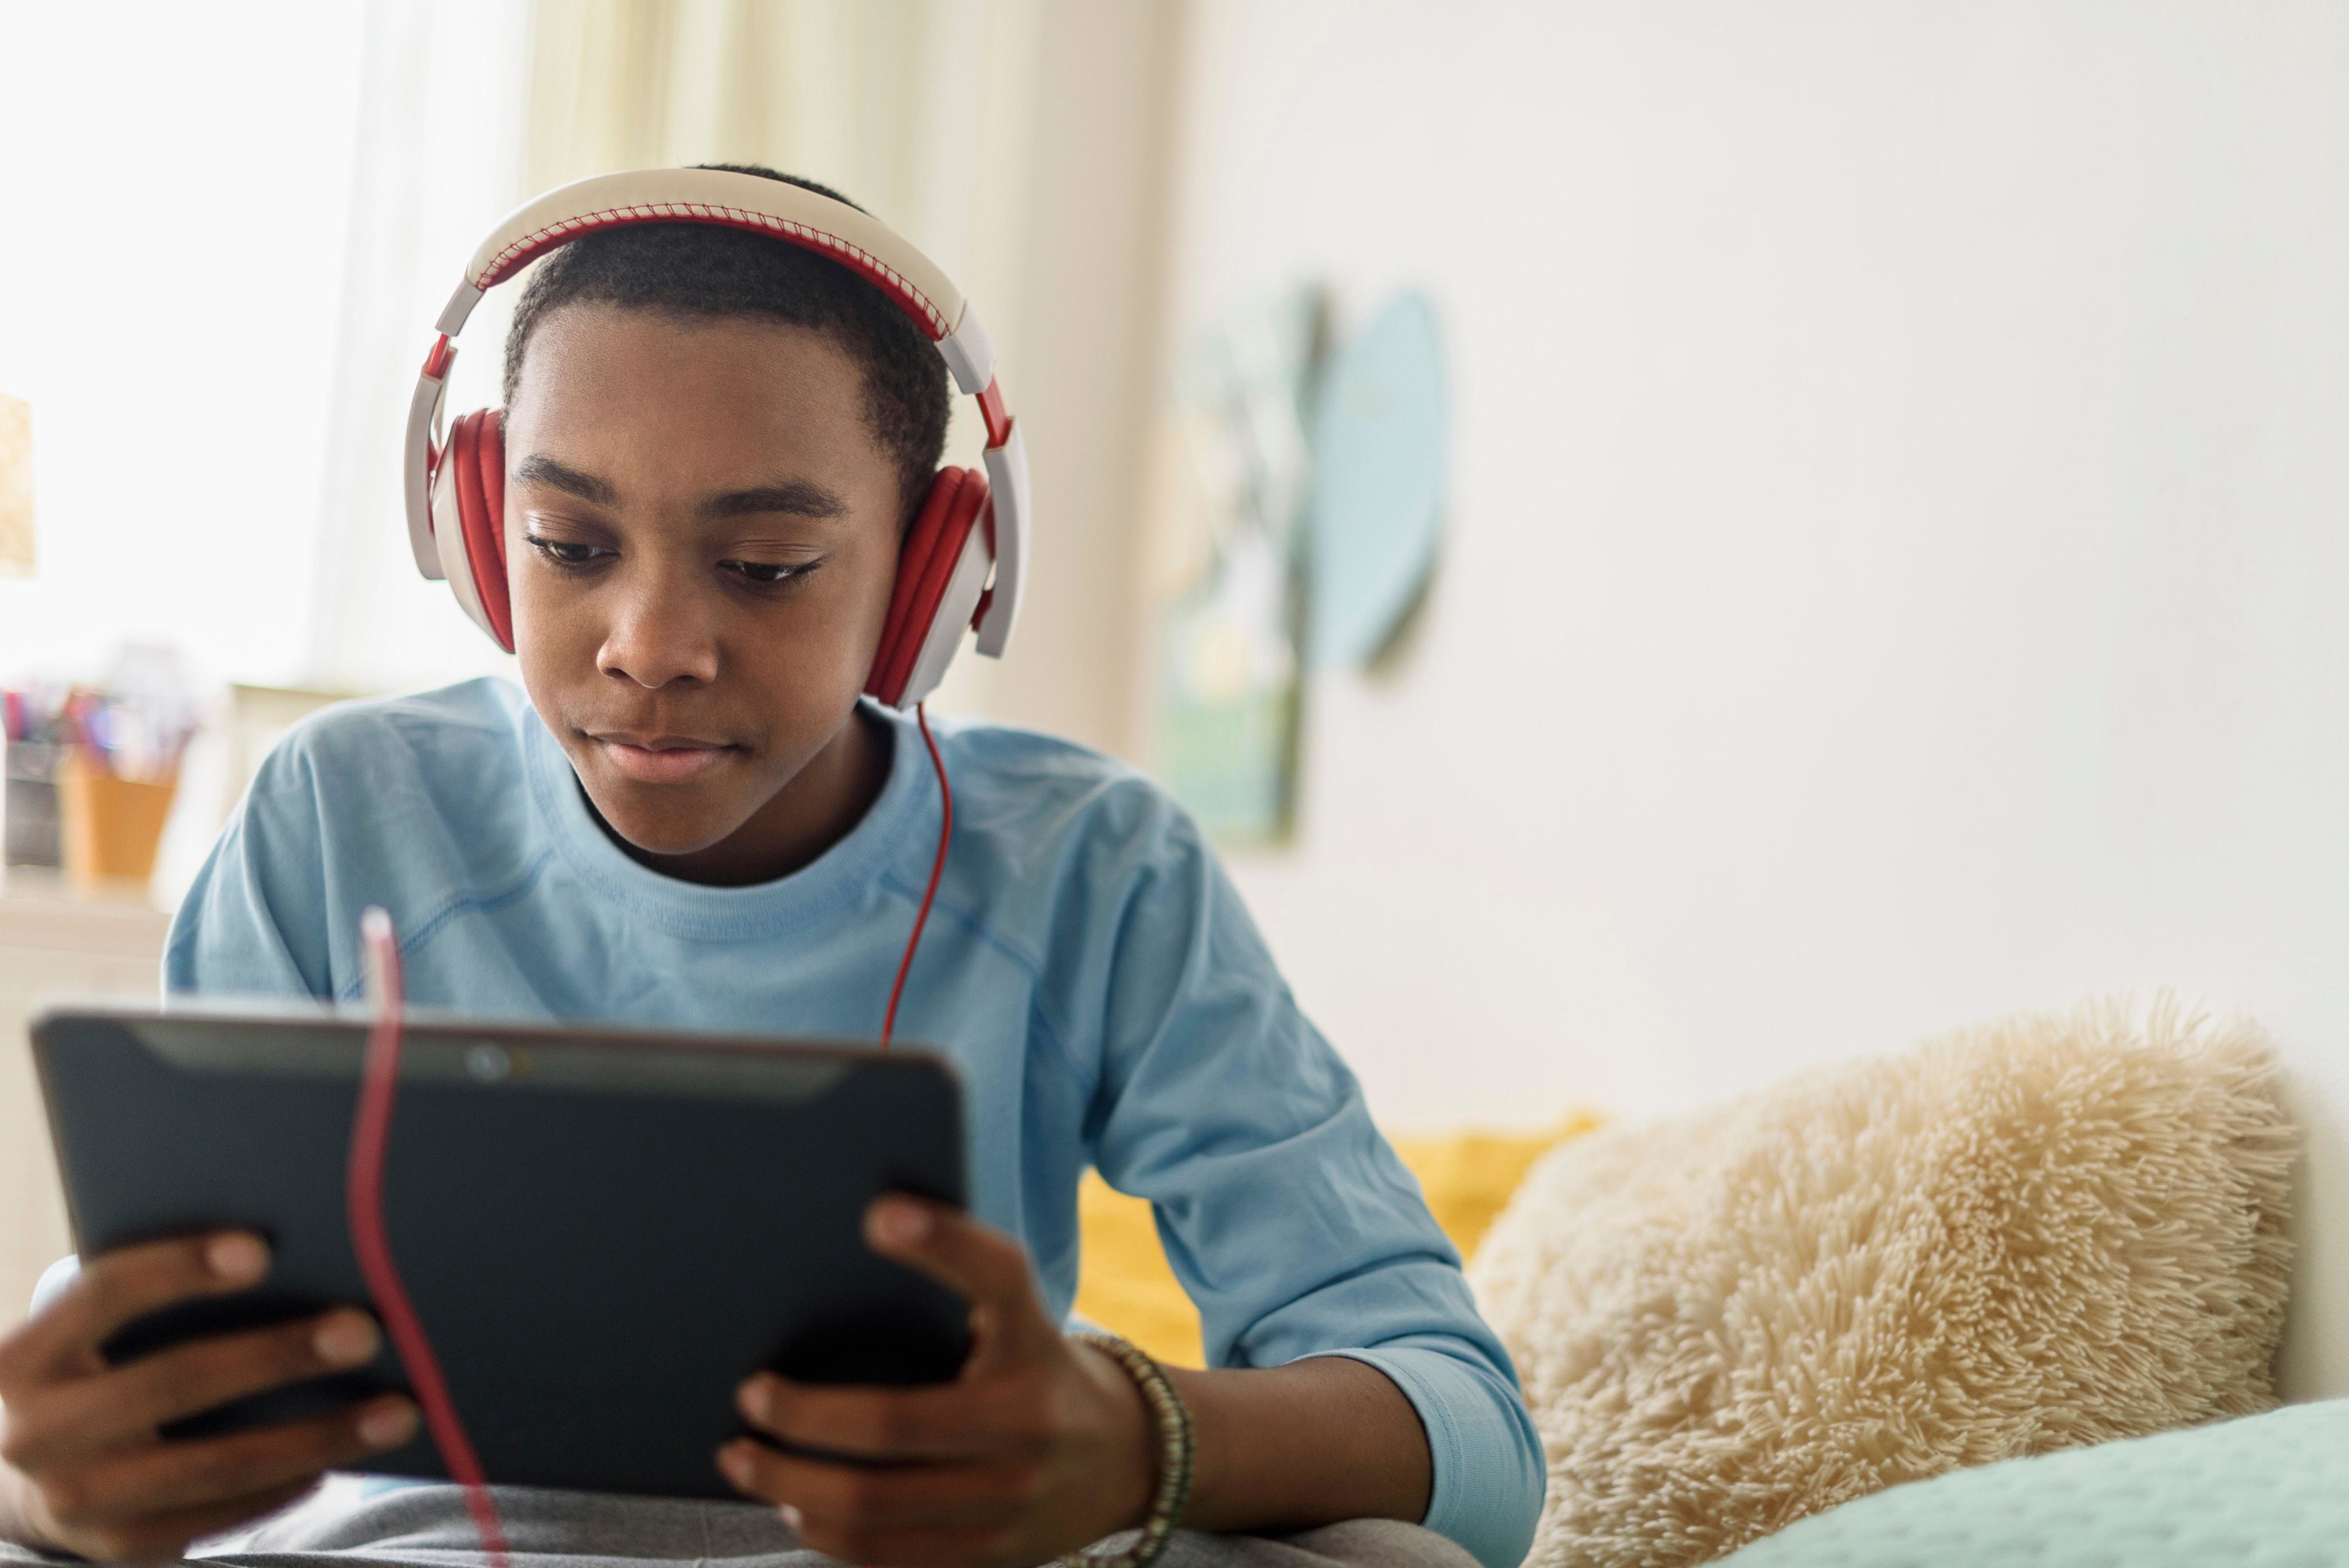 Young teen age boy using a tablet while wearing headphones